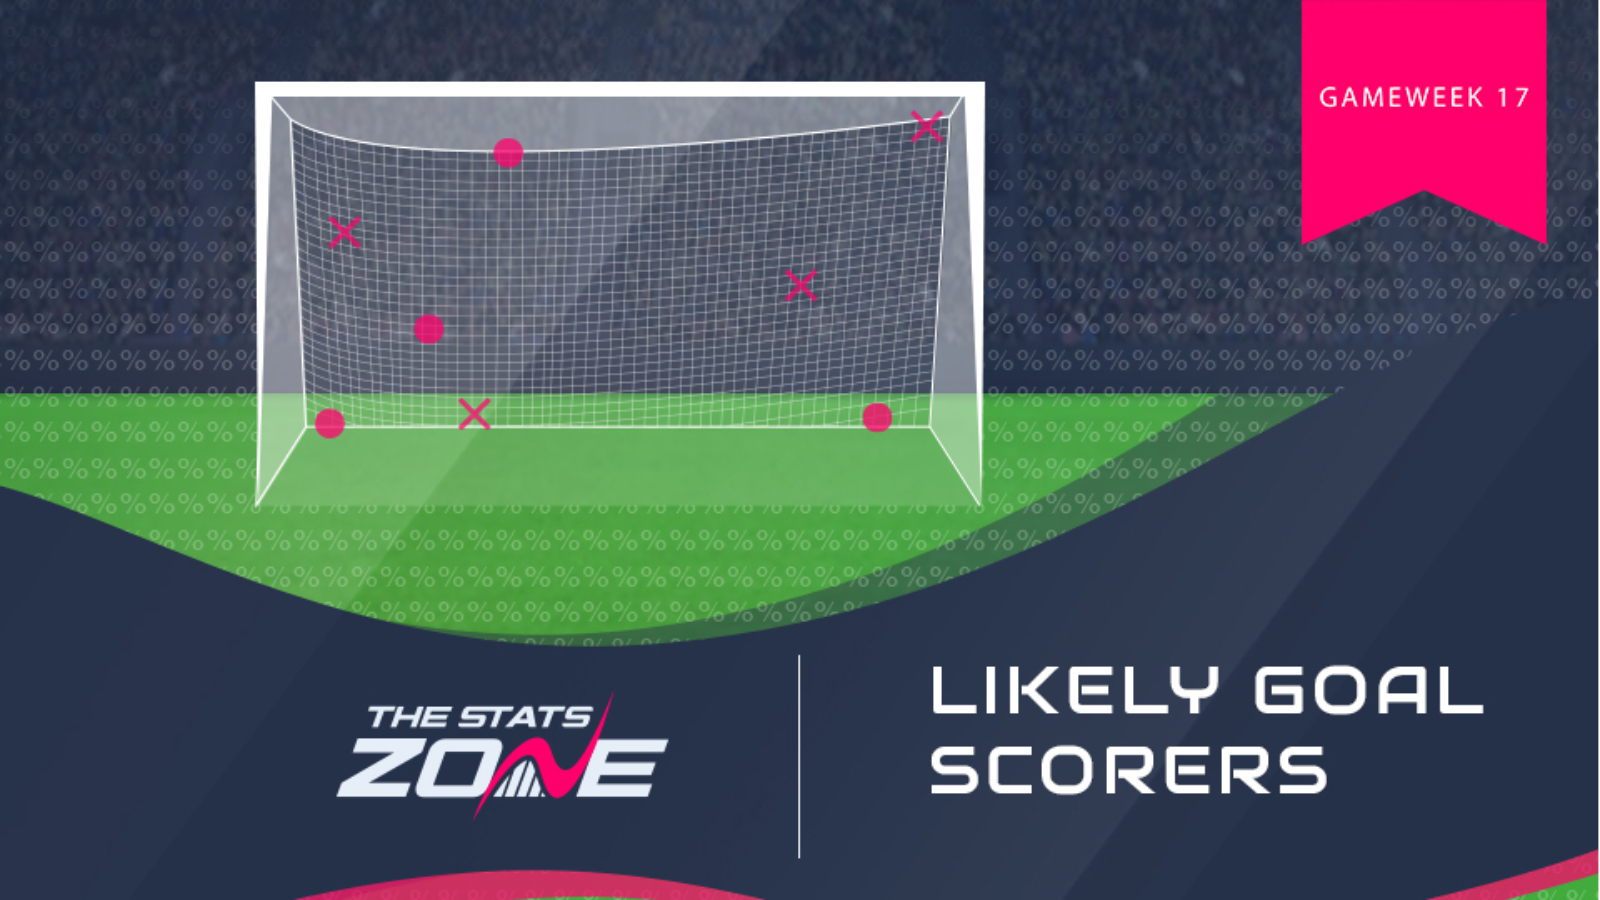 FPL Gameweek 17 – likely goalscorers - The Stats Zone